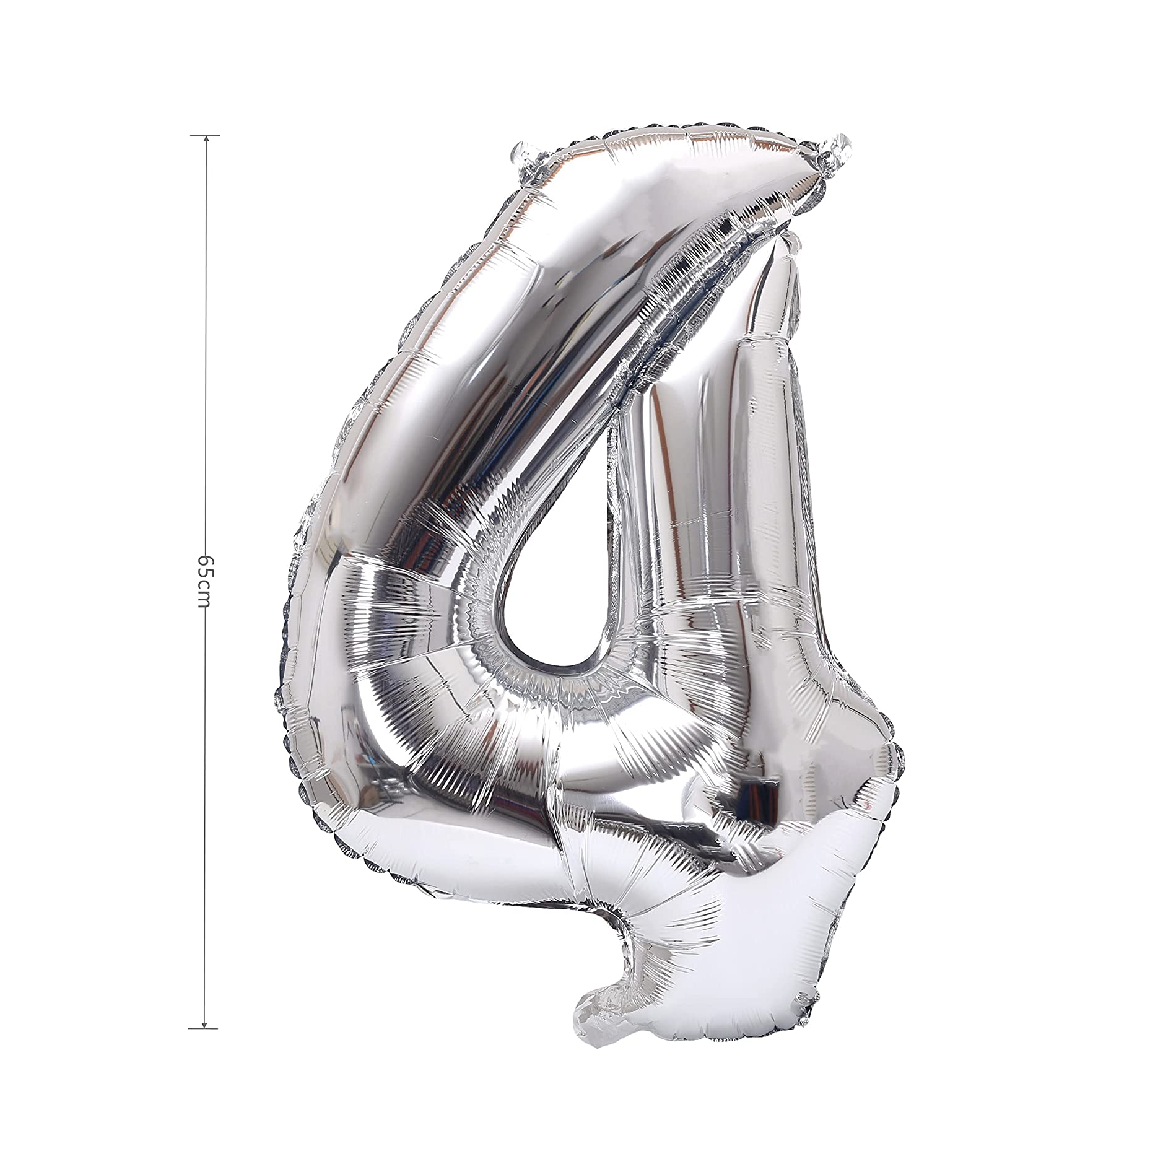 Party Decoration Balloon - 32 Inch Silver #4